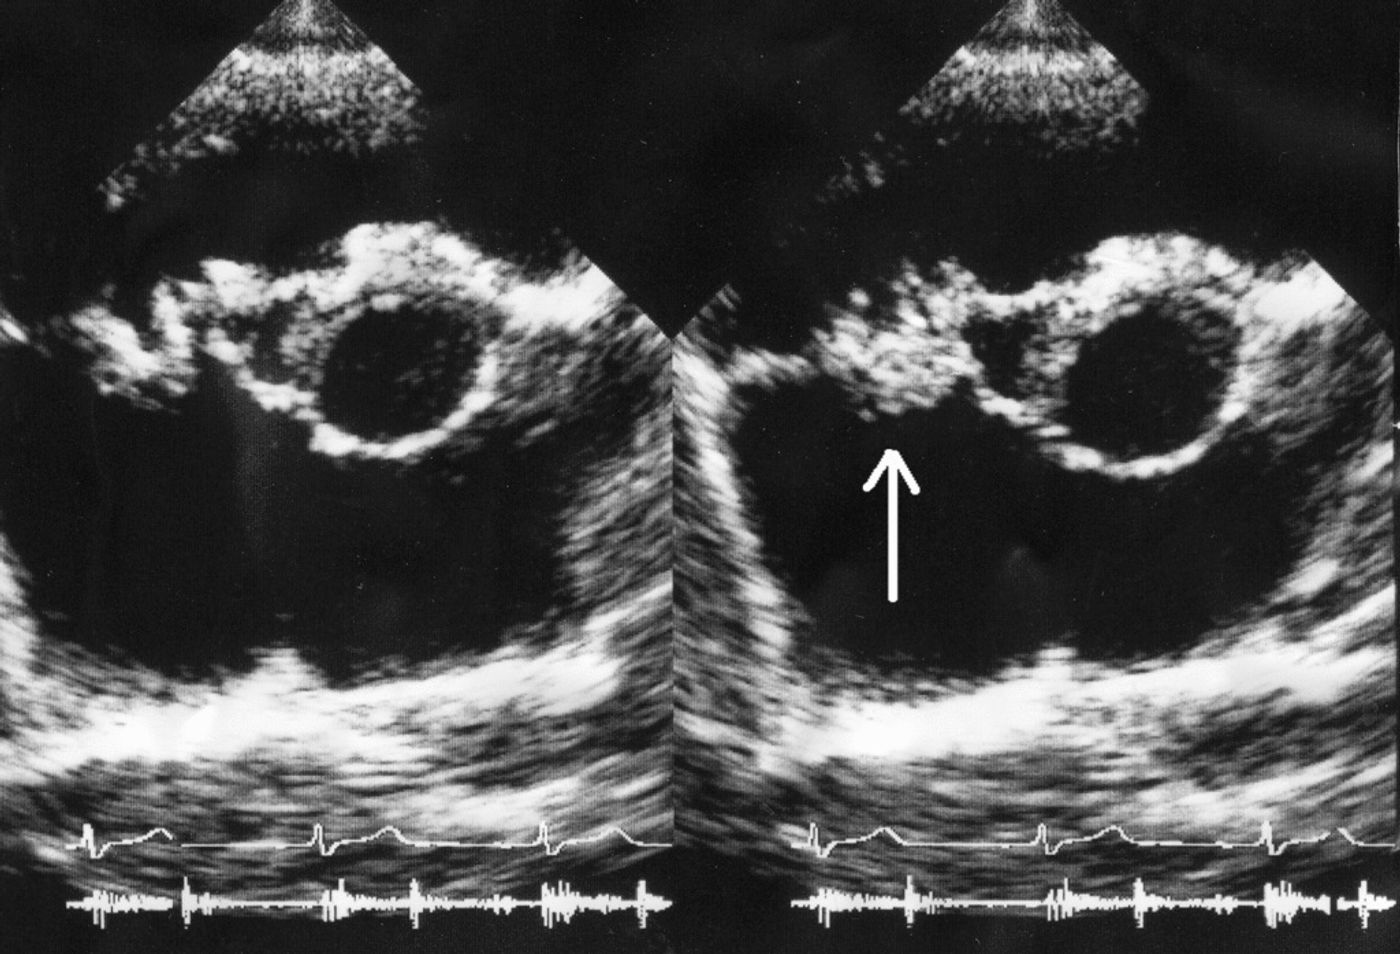 An endocarditis ultrasound; vegetation on tricuspid valve by echocardiography. Source: Boundless